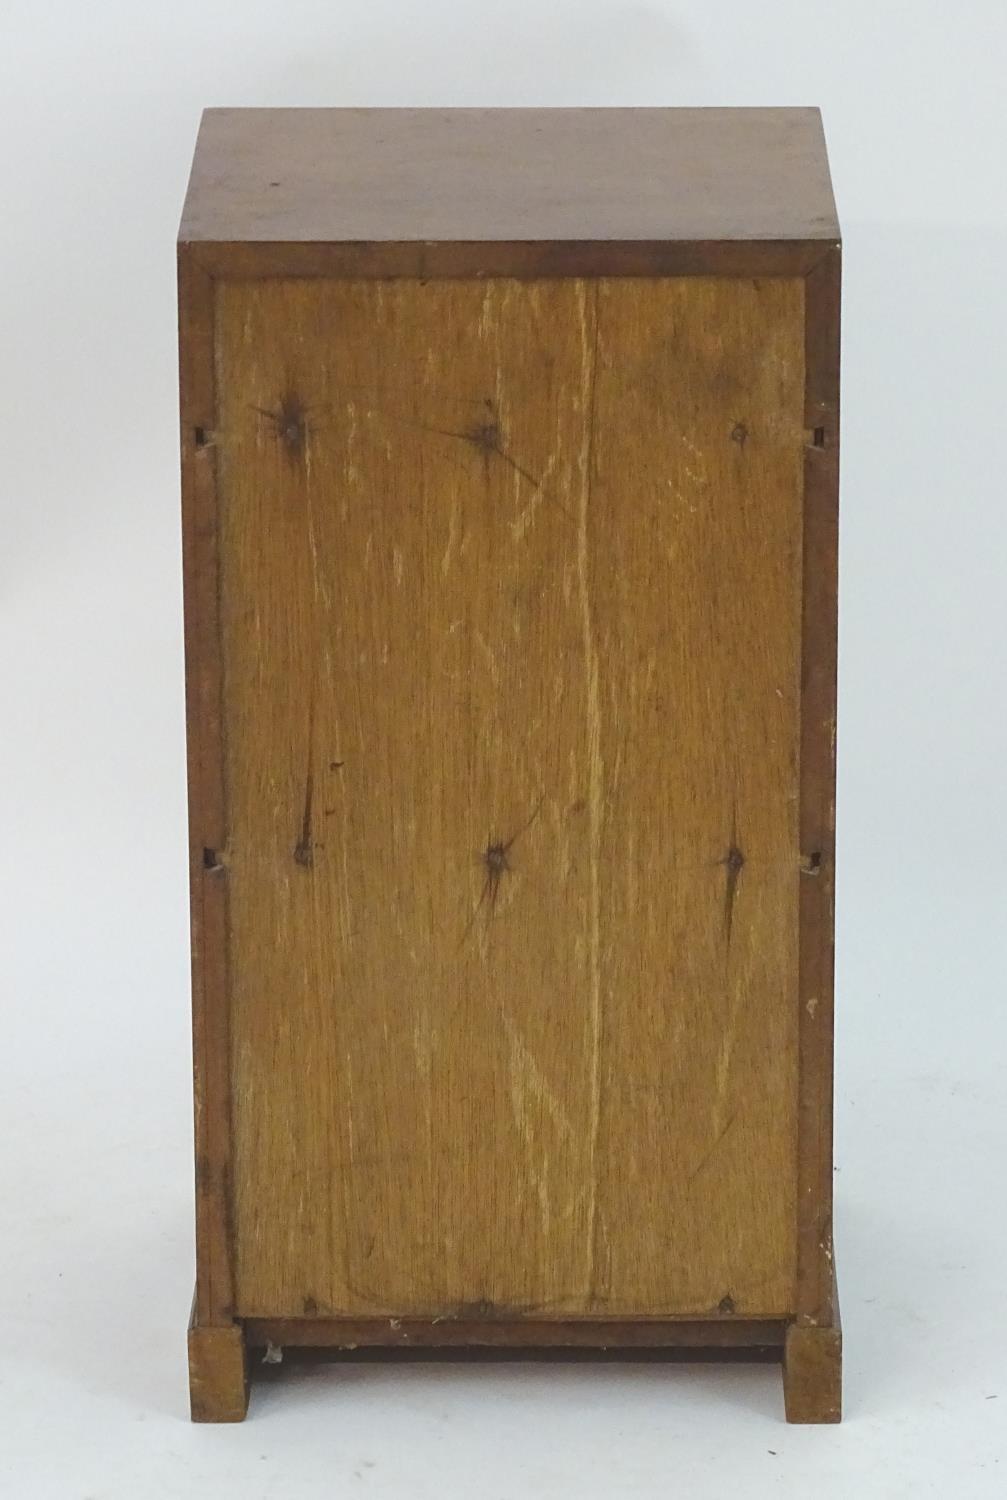 Hand-Crafted Romney Green, Style of, an Arts & Crafts Cotswold School Walnut Bedside Cabinet For Sale